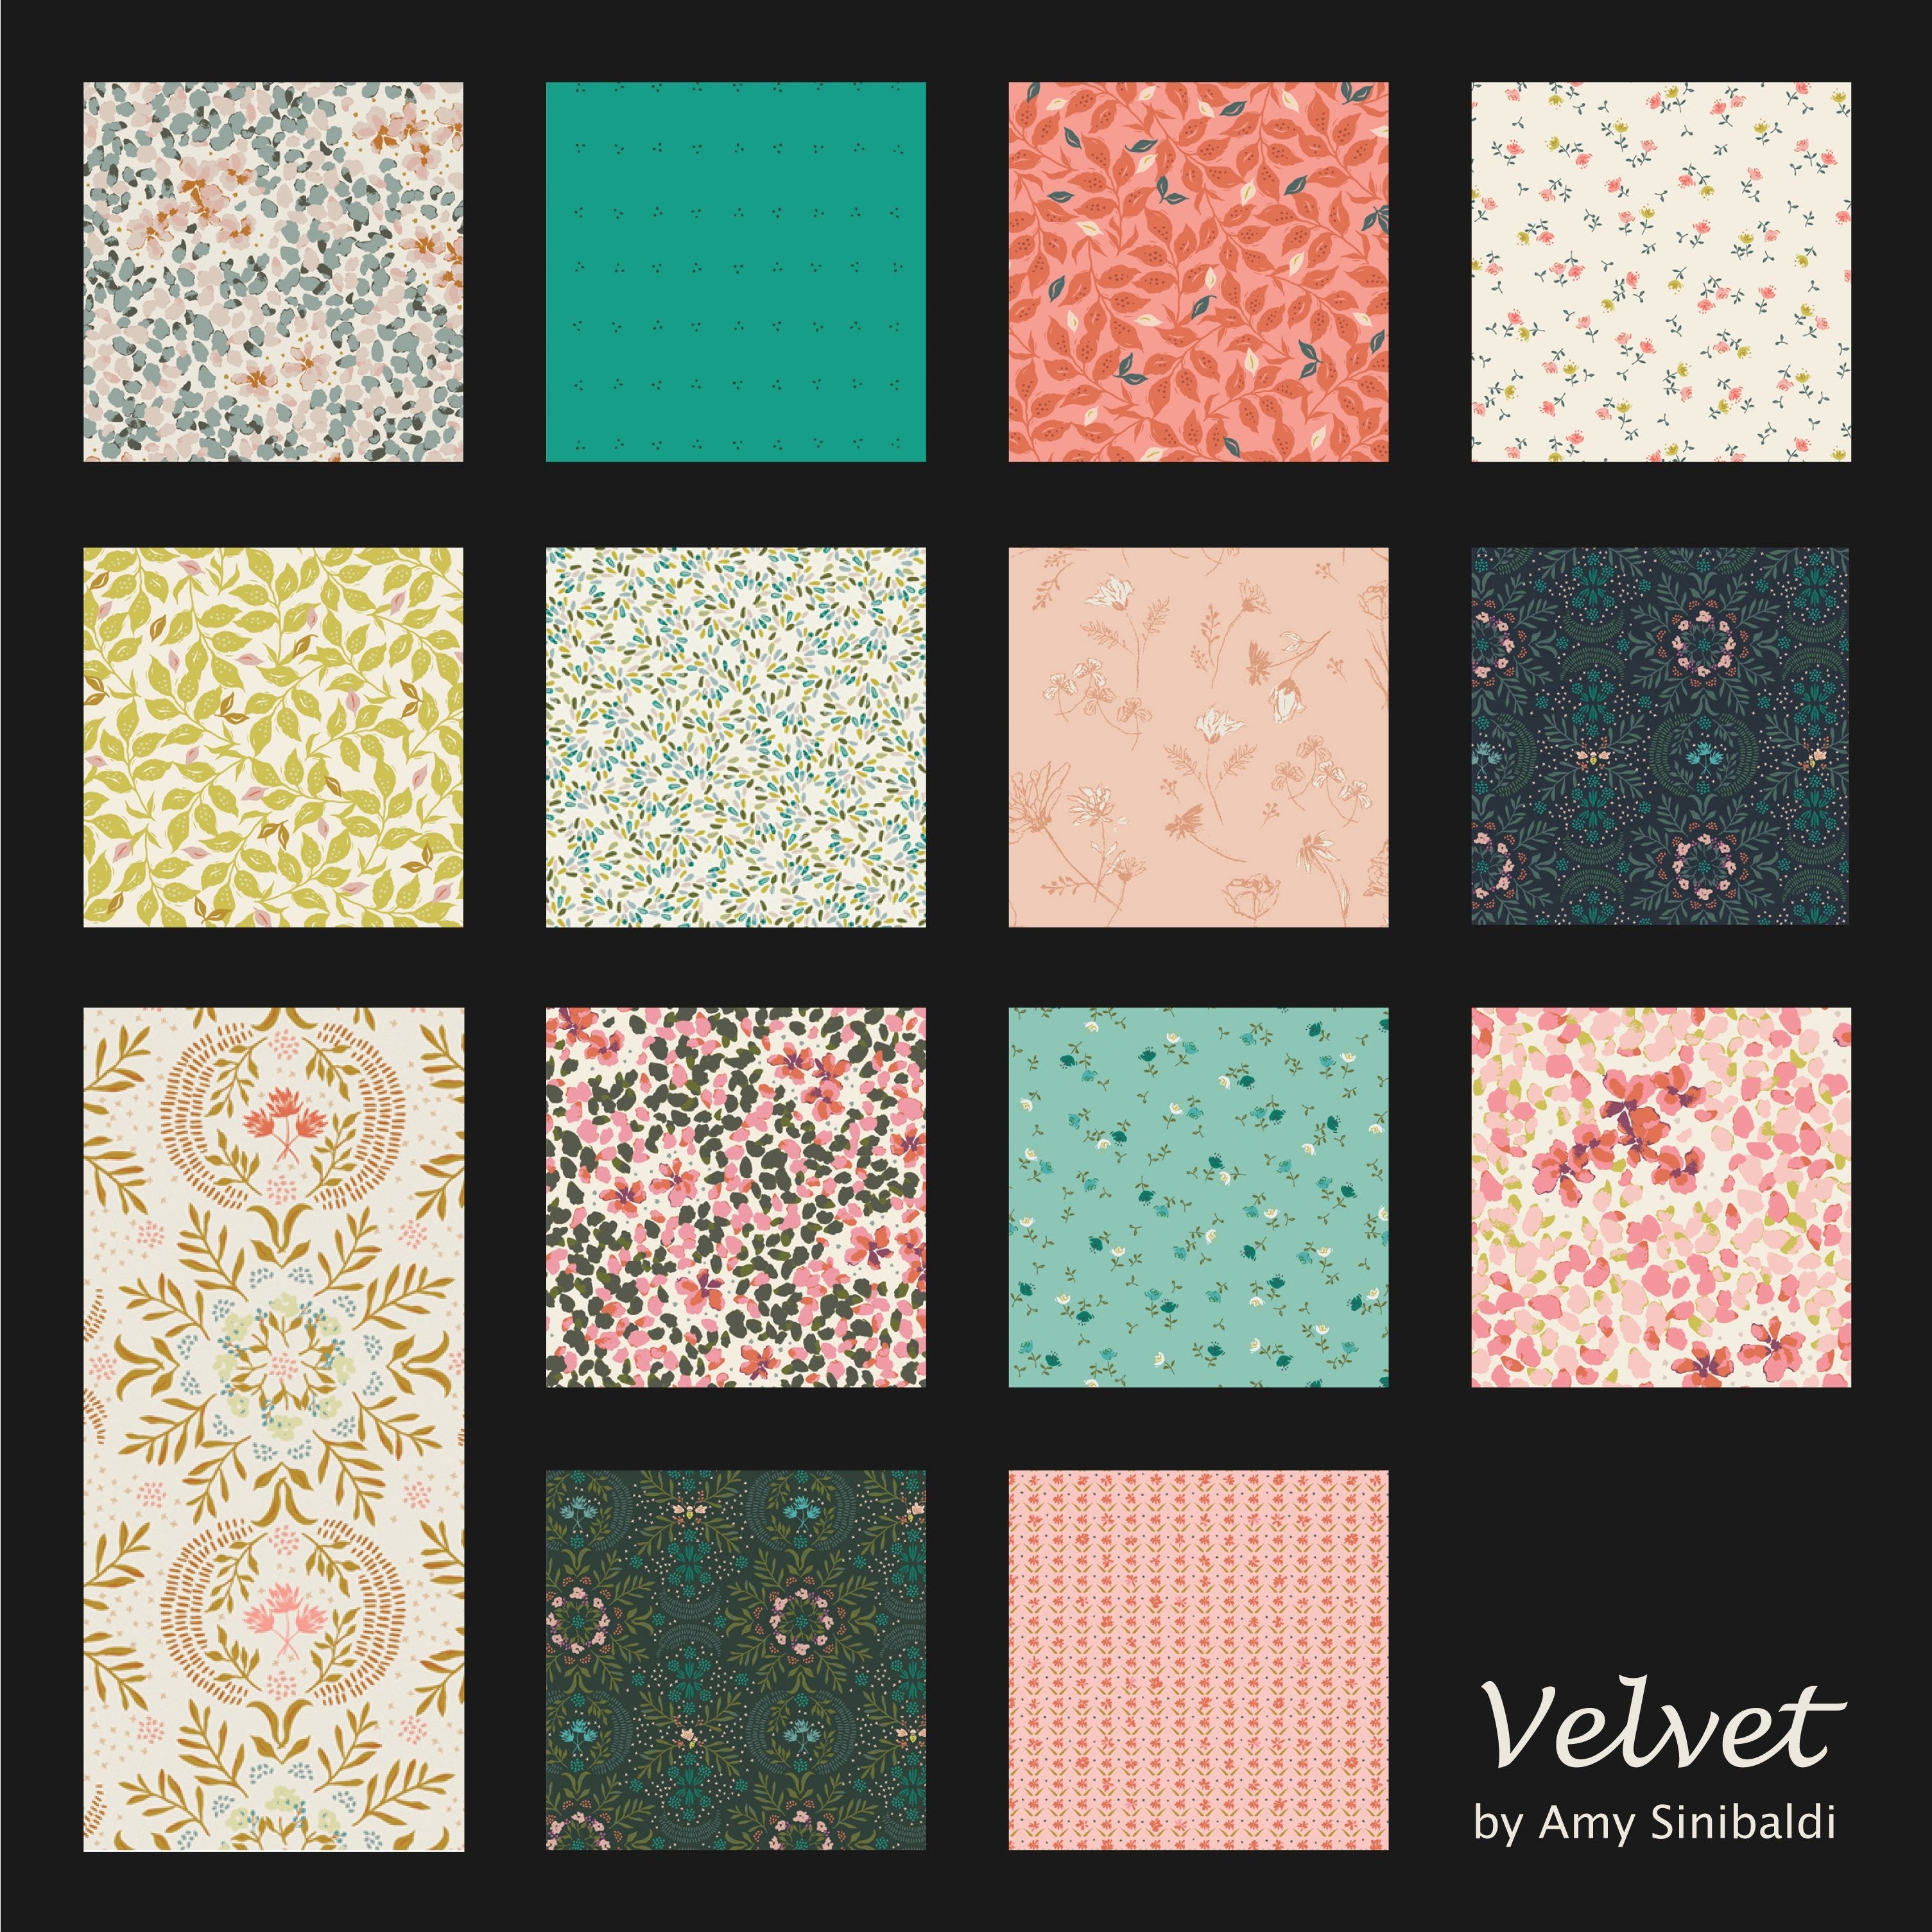 This image shows fourteen fabric swatches in the collection “Velvet” by Amy Sinibaldi. Prints in this line are traditional and floral, with a myriad of colors including navy, teal, baby pink, lemon yellow, and white.